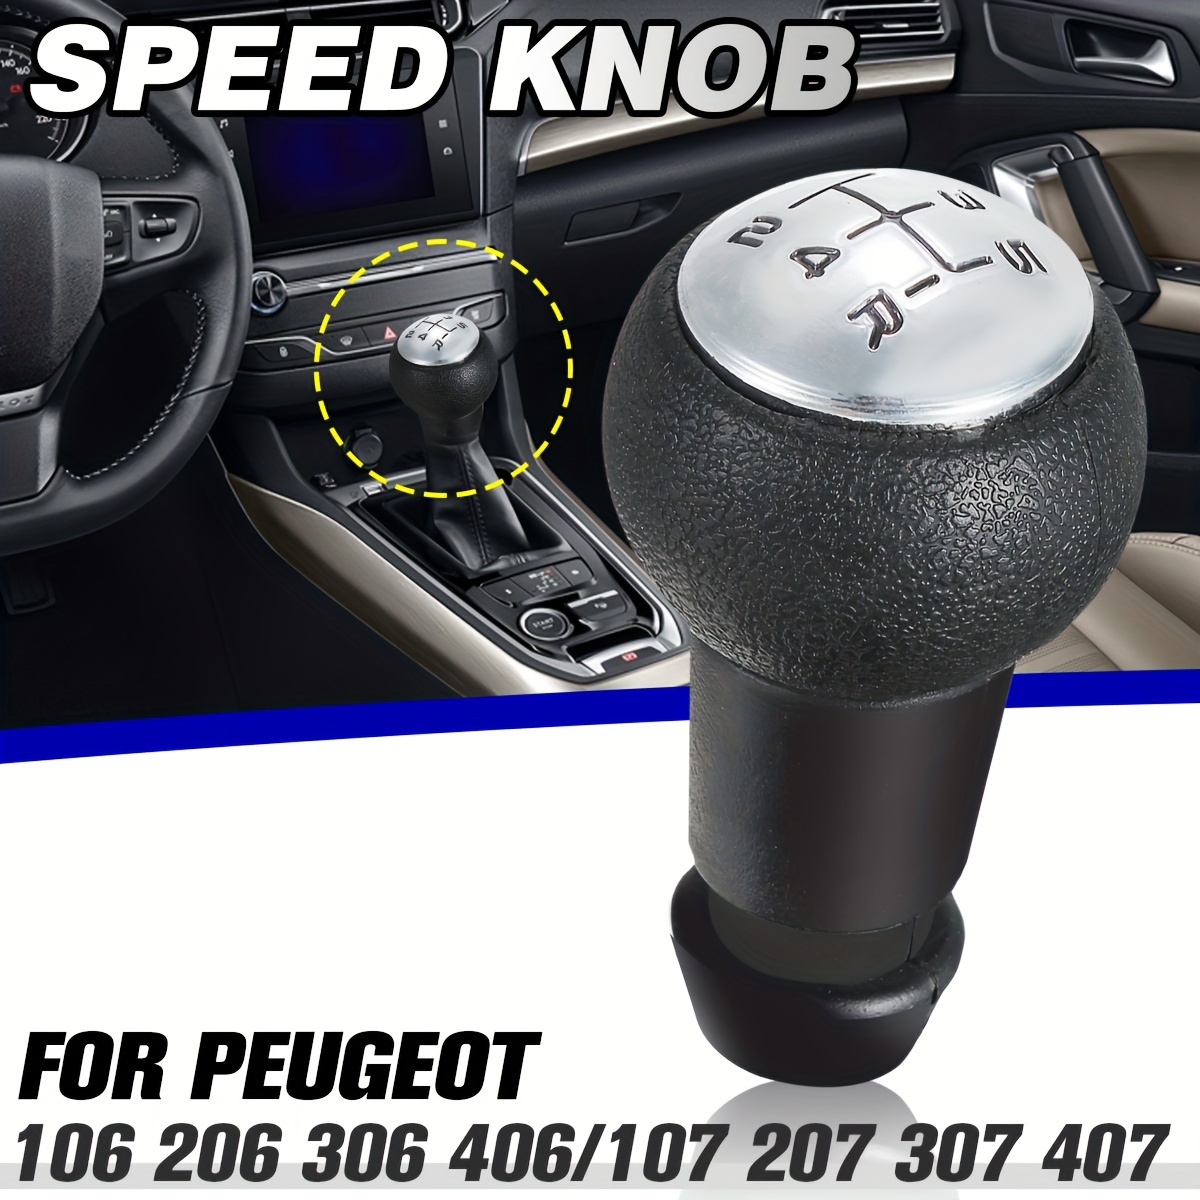 

5 Speed Manual Gear Shift Knob For Peugeot 306 406 107 207 307 407